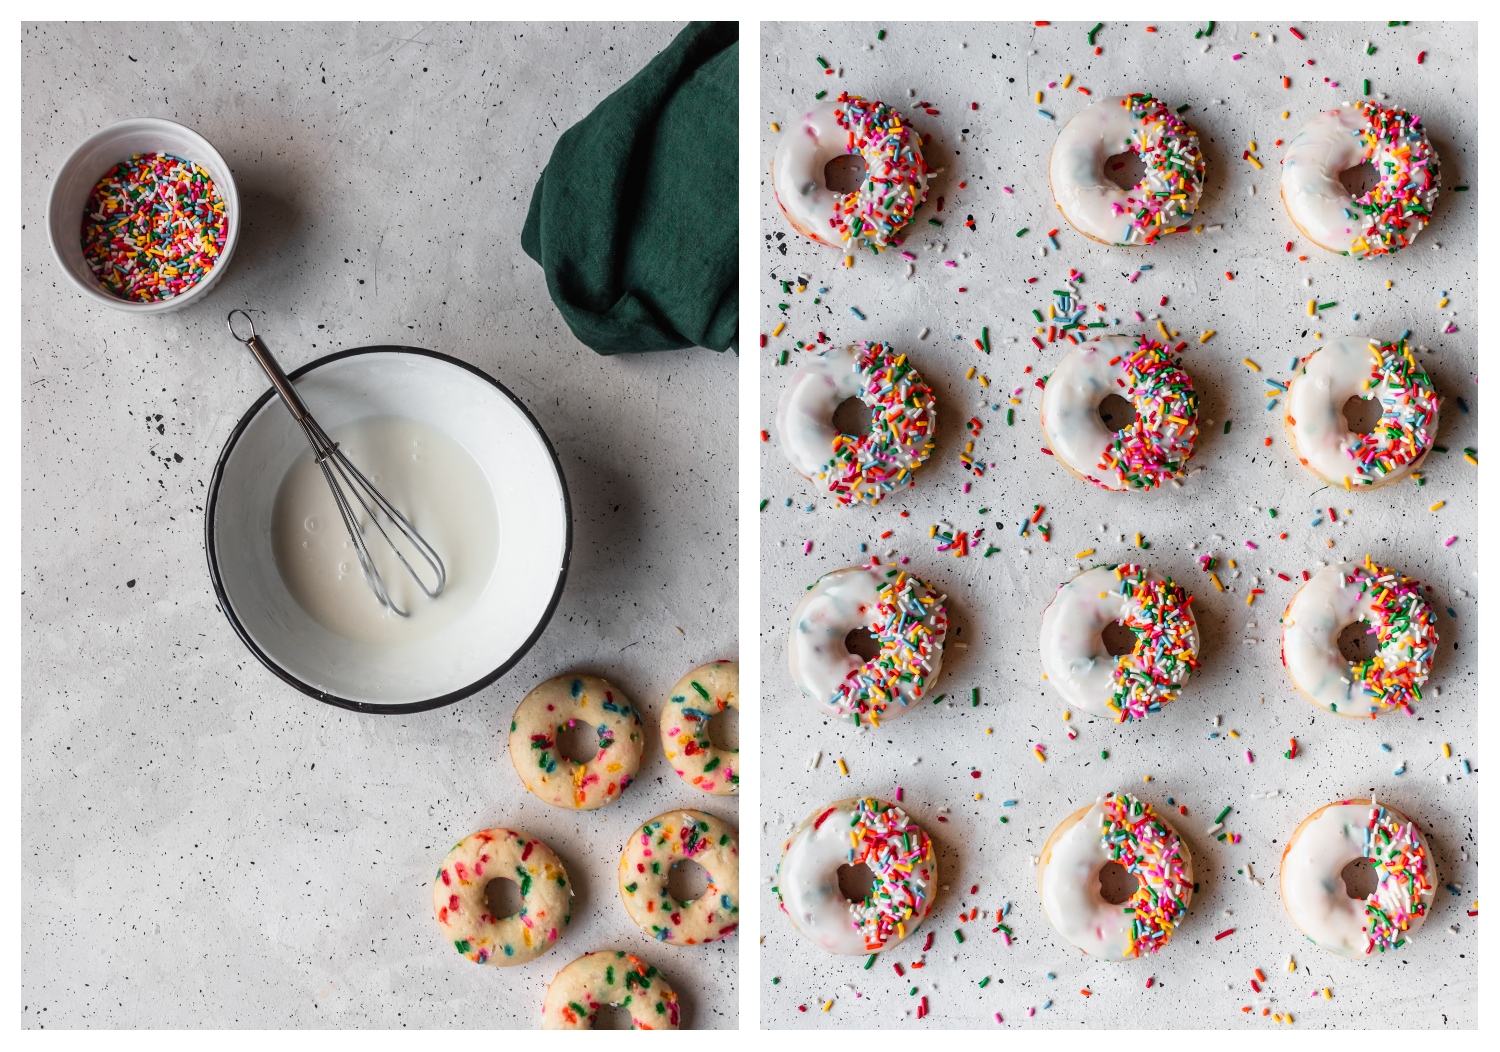 Two overhead images. On the left, glaze is being mixed together on a speckled table, surrounded by sprinkles and a green linen. On the right, 12 sprinkle donuts are lined up on the table.